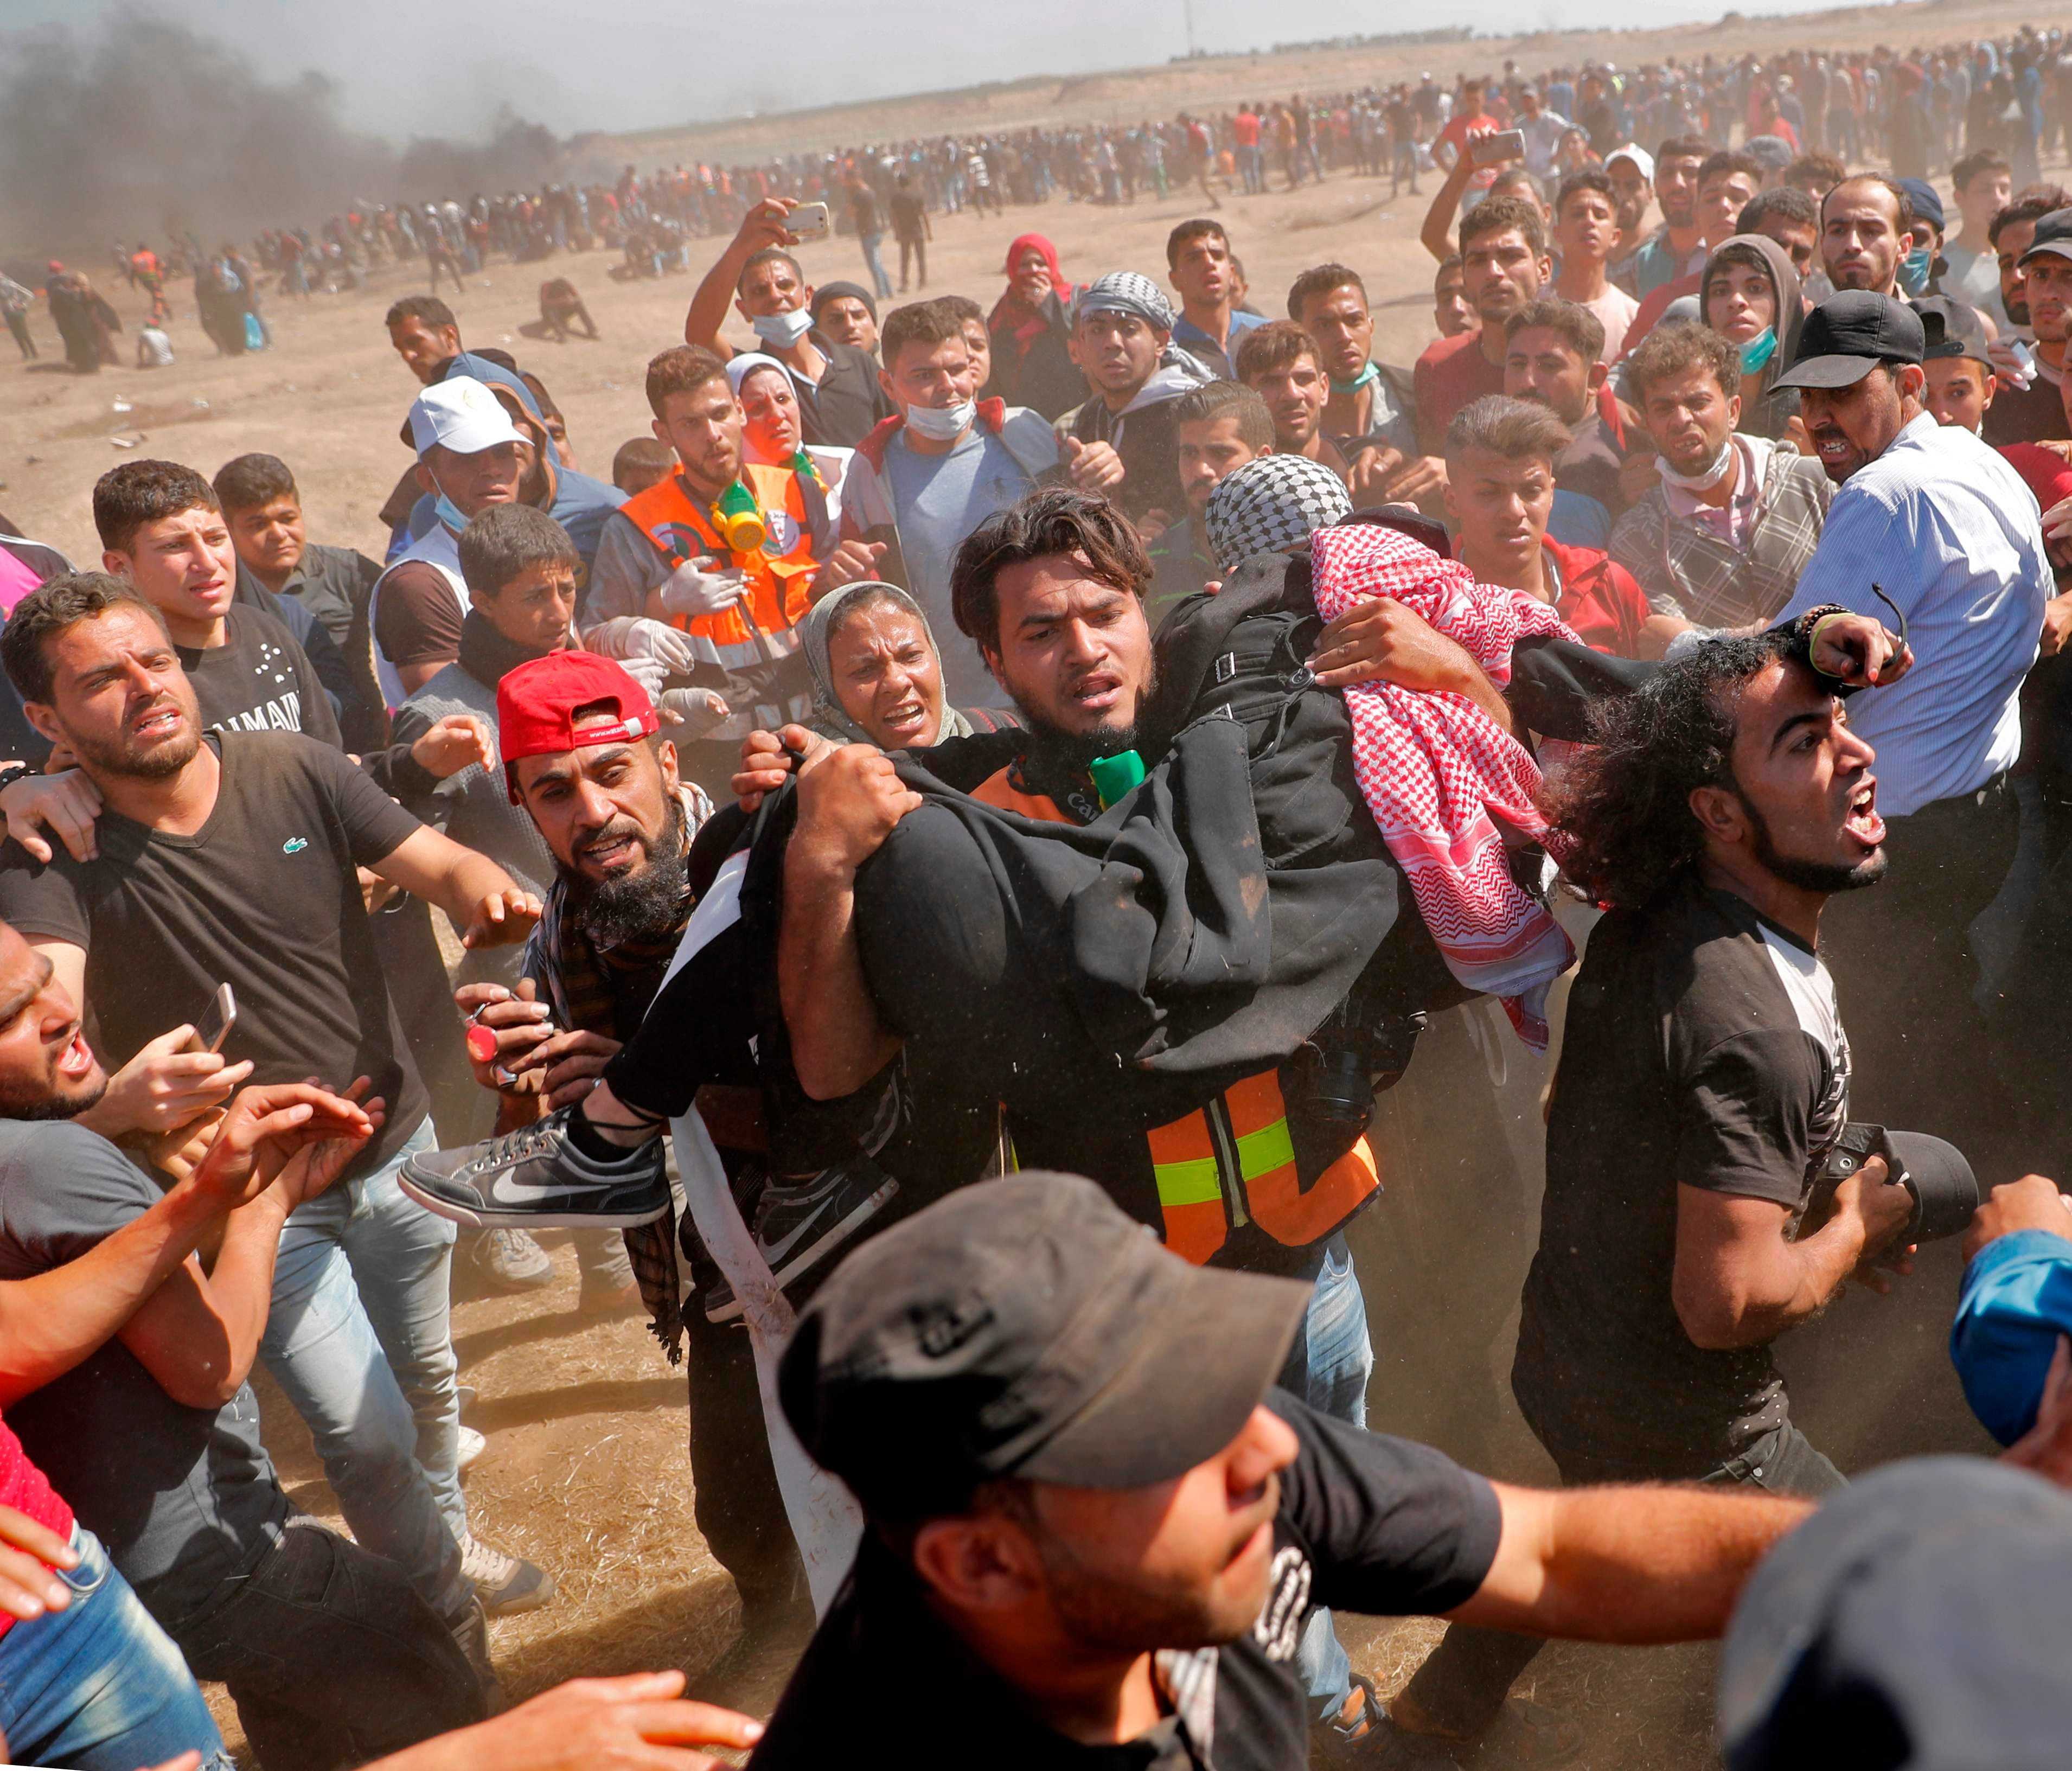 Palestinians carry a demonstrator injured during clashes with Israeli forces near the border between the Gaza strip and Israel east of Gaza City.